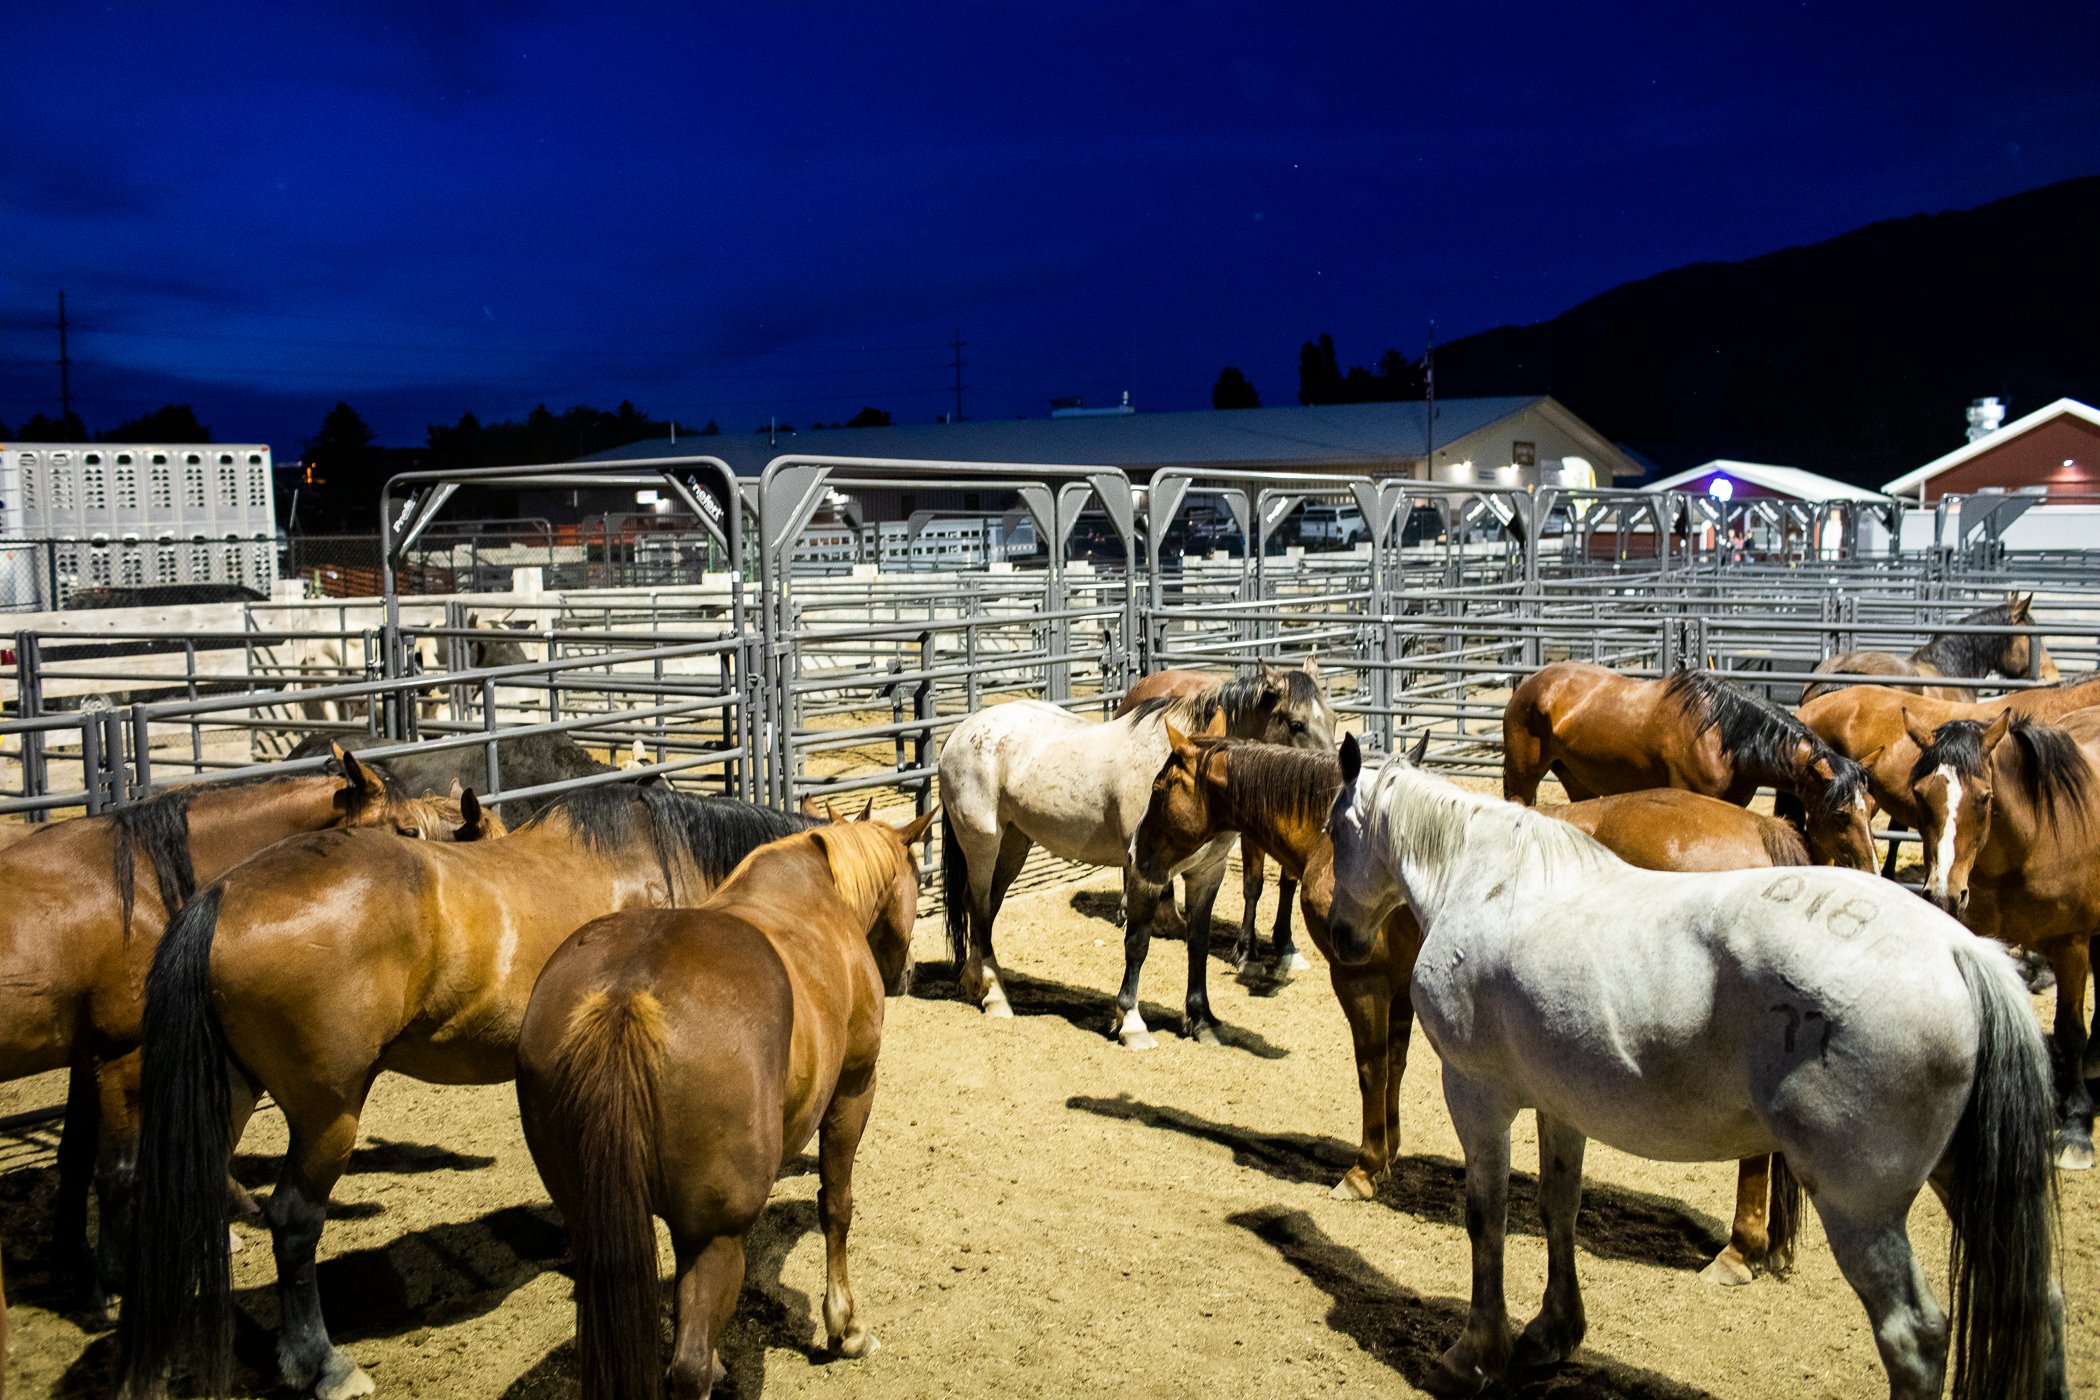 At dusk, several horses gathered together at the Jackson Hole rodeo when Adam Hester was shooting 